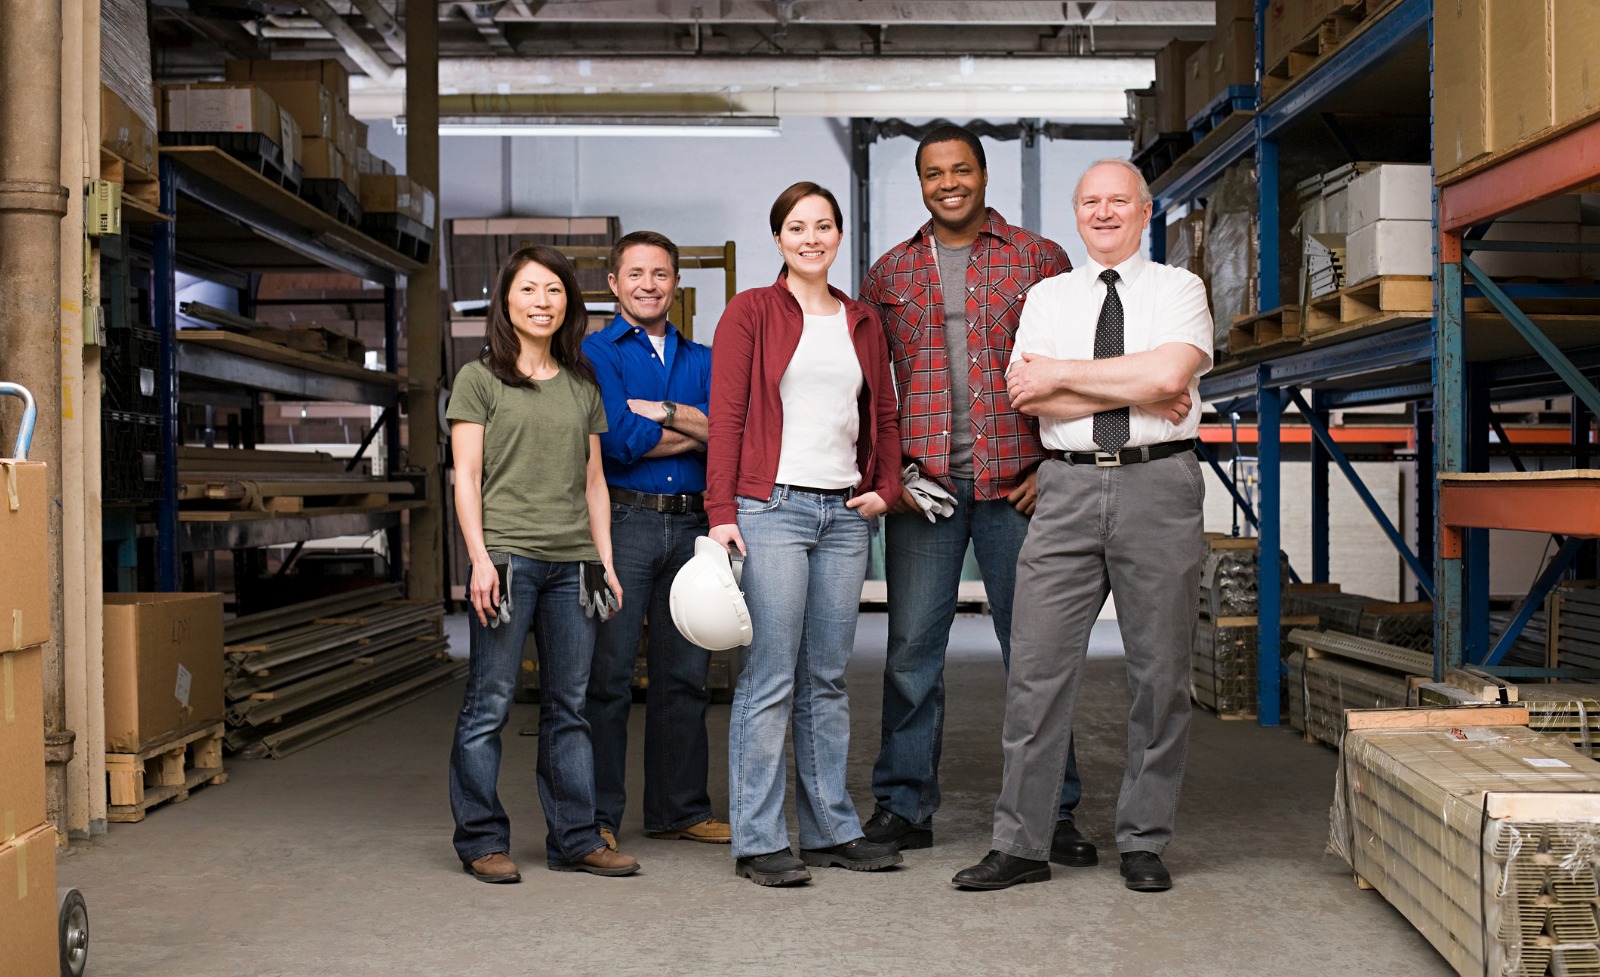 Team of employees and manager smiling in warehouse setting.